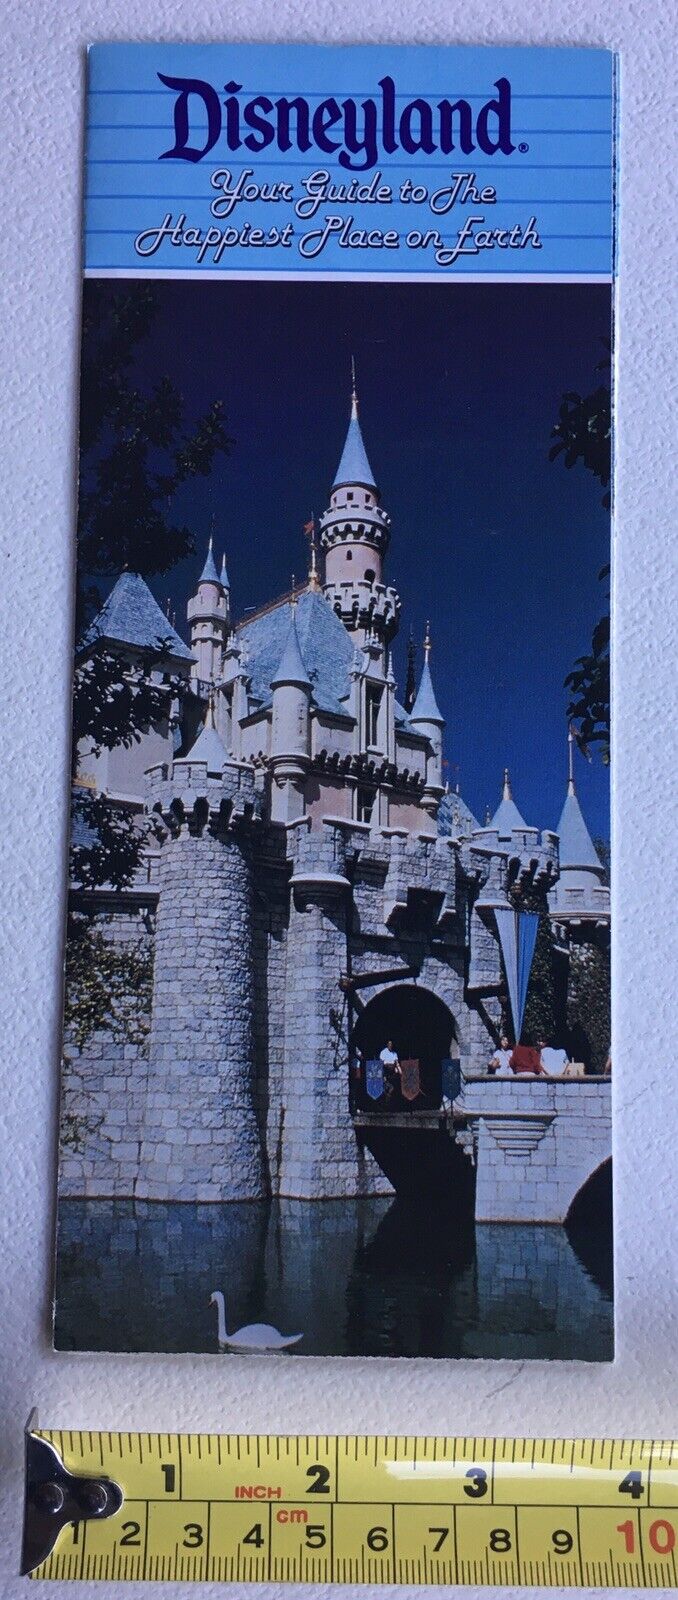 1986 Disneyland Promotional Ad Brochure  “Your Guide to Happiest Place on Earth”